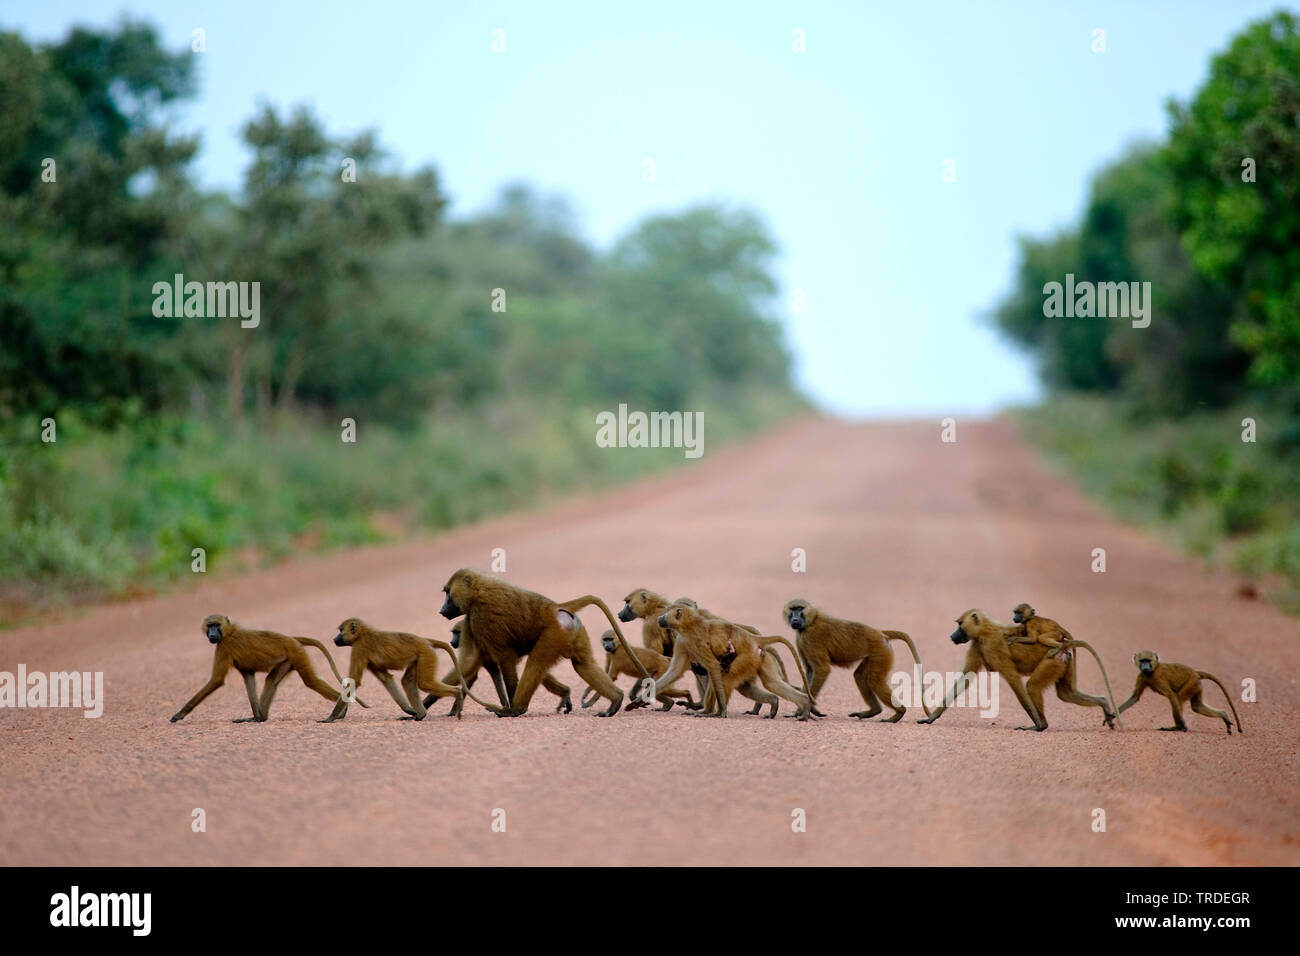 Guinean baboon, Western baboon (Papio papio), crossing a road, Gambia, Kiang West National Park Stock Photo